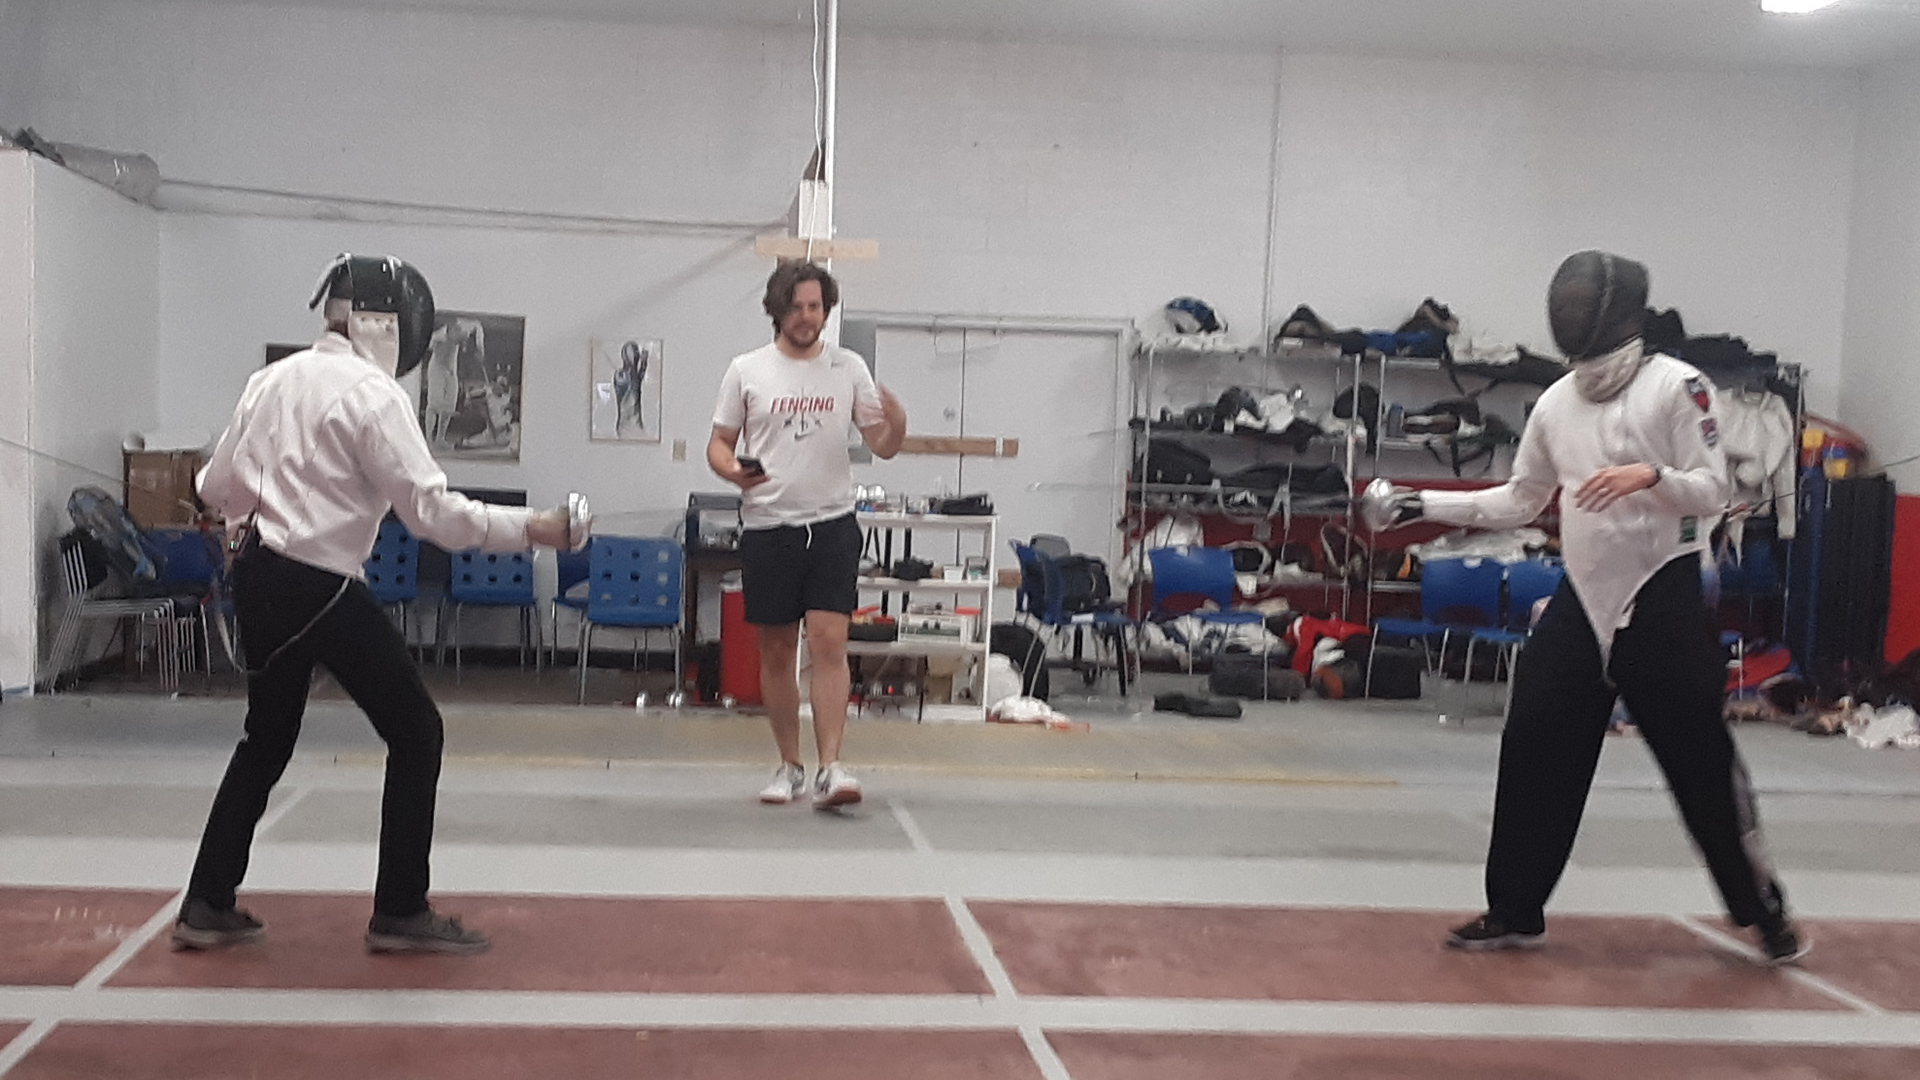 More Than a Game host Tony Perkins (left) prepares to take on Still Point Fencing instructor Jay Fowler (right) while fellow instructor Nick Going officiates.